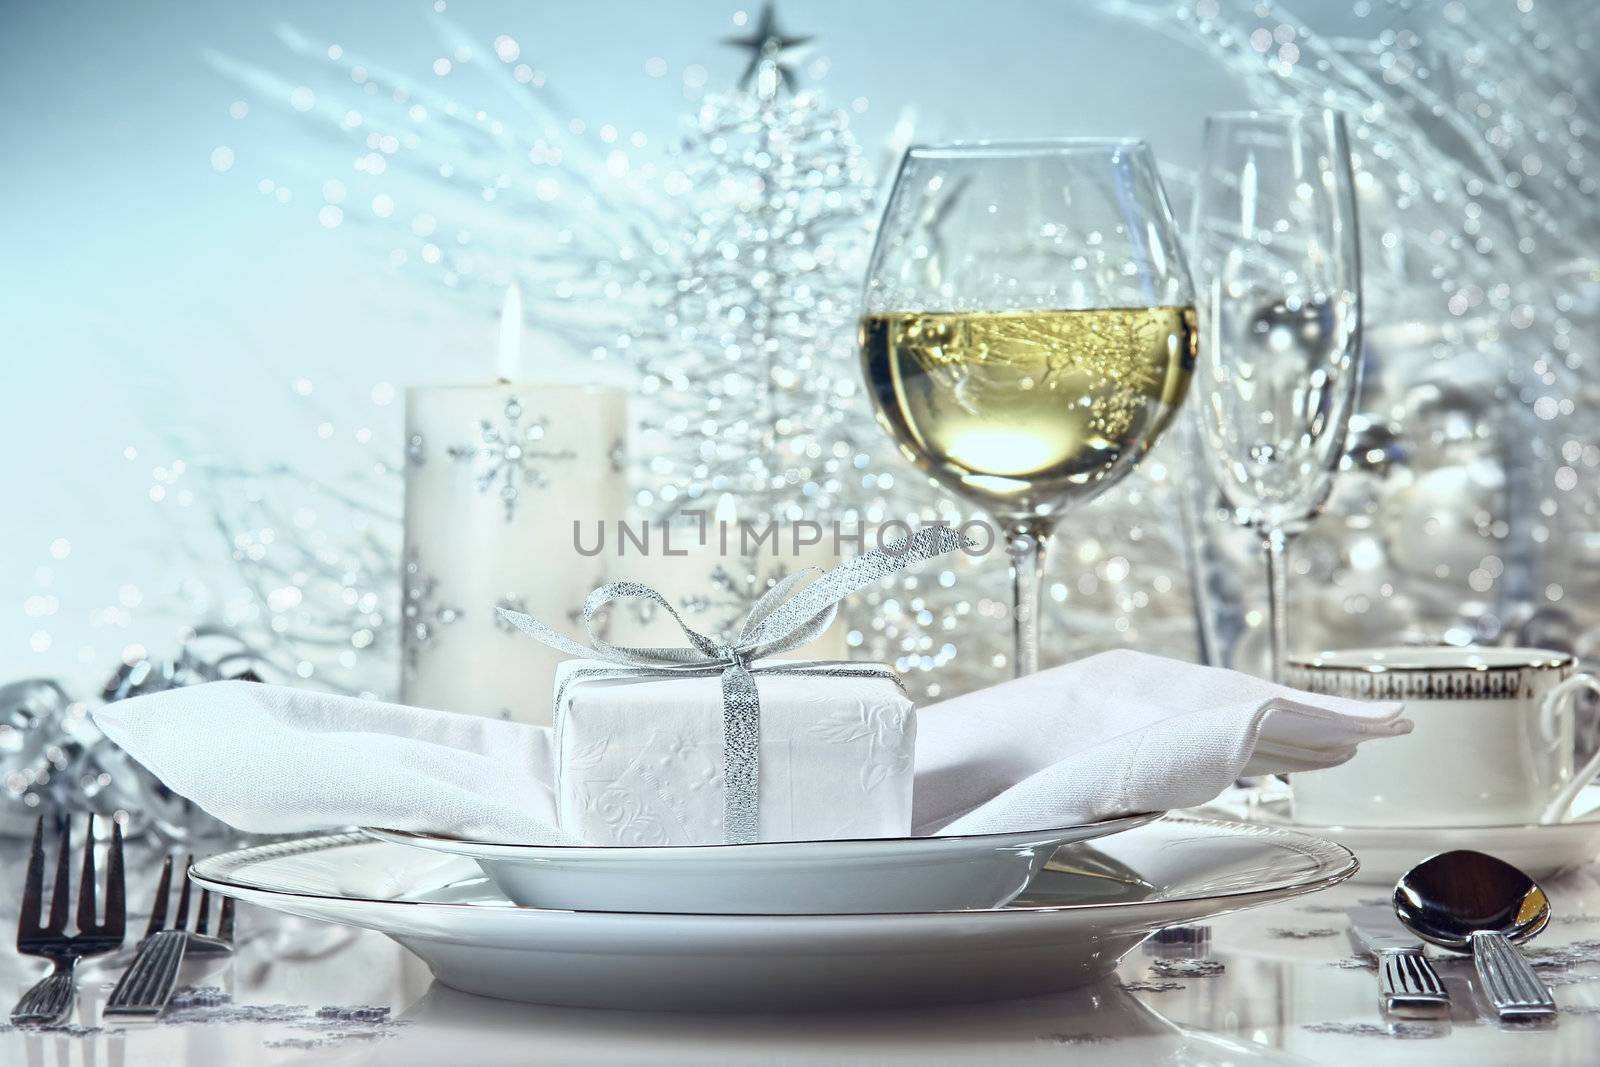 Festive silver dinner setting for the holidays by Sandralise